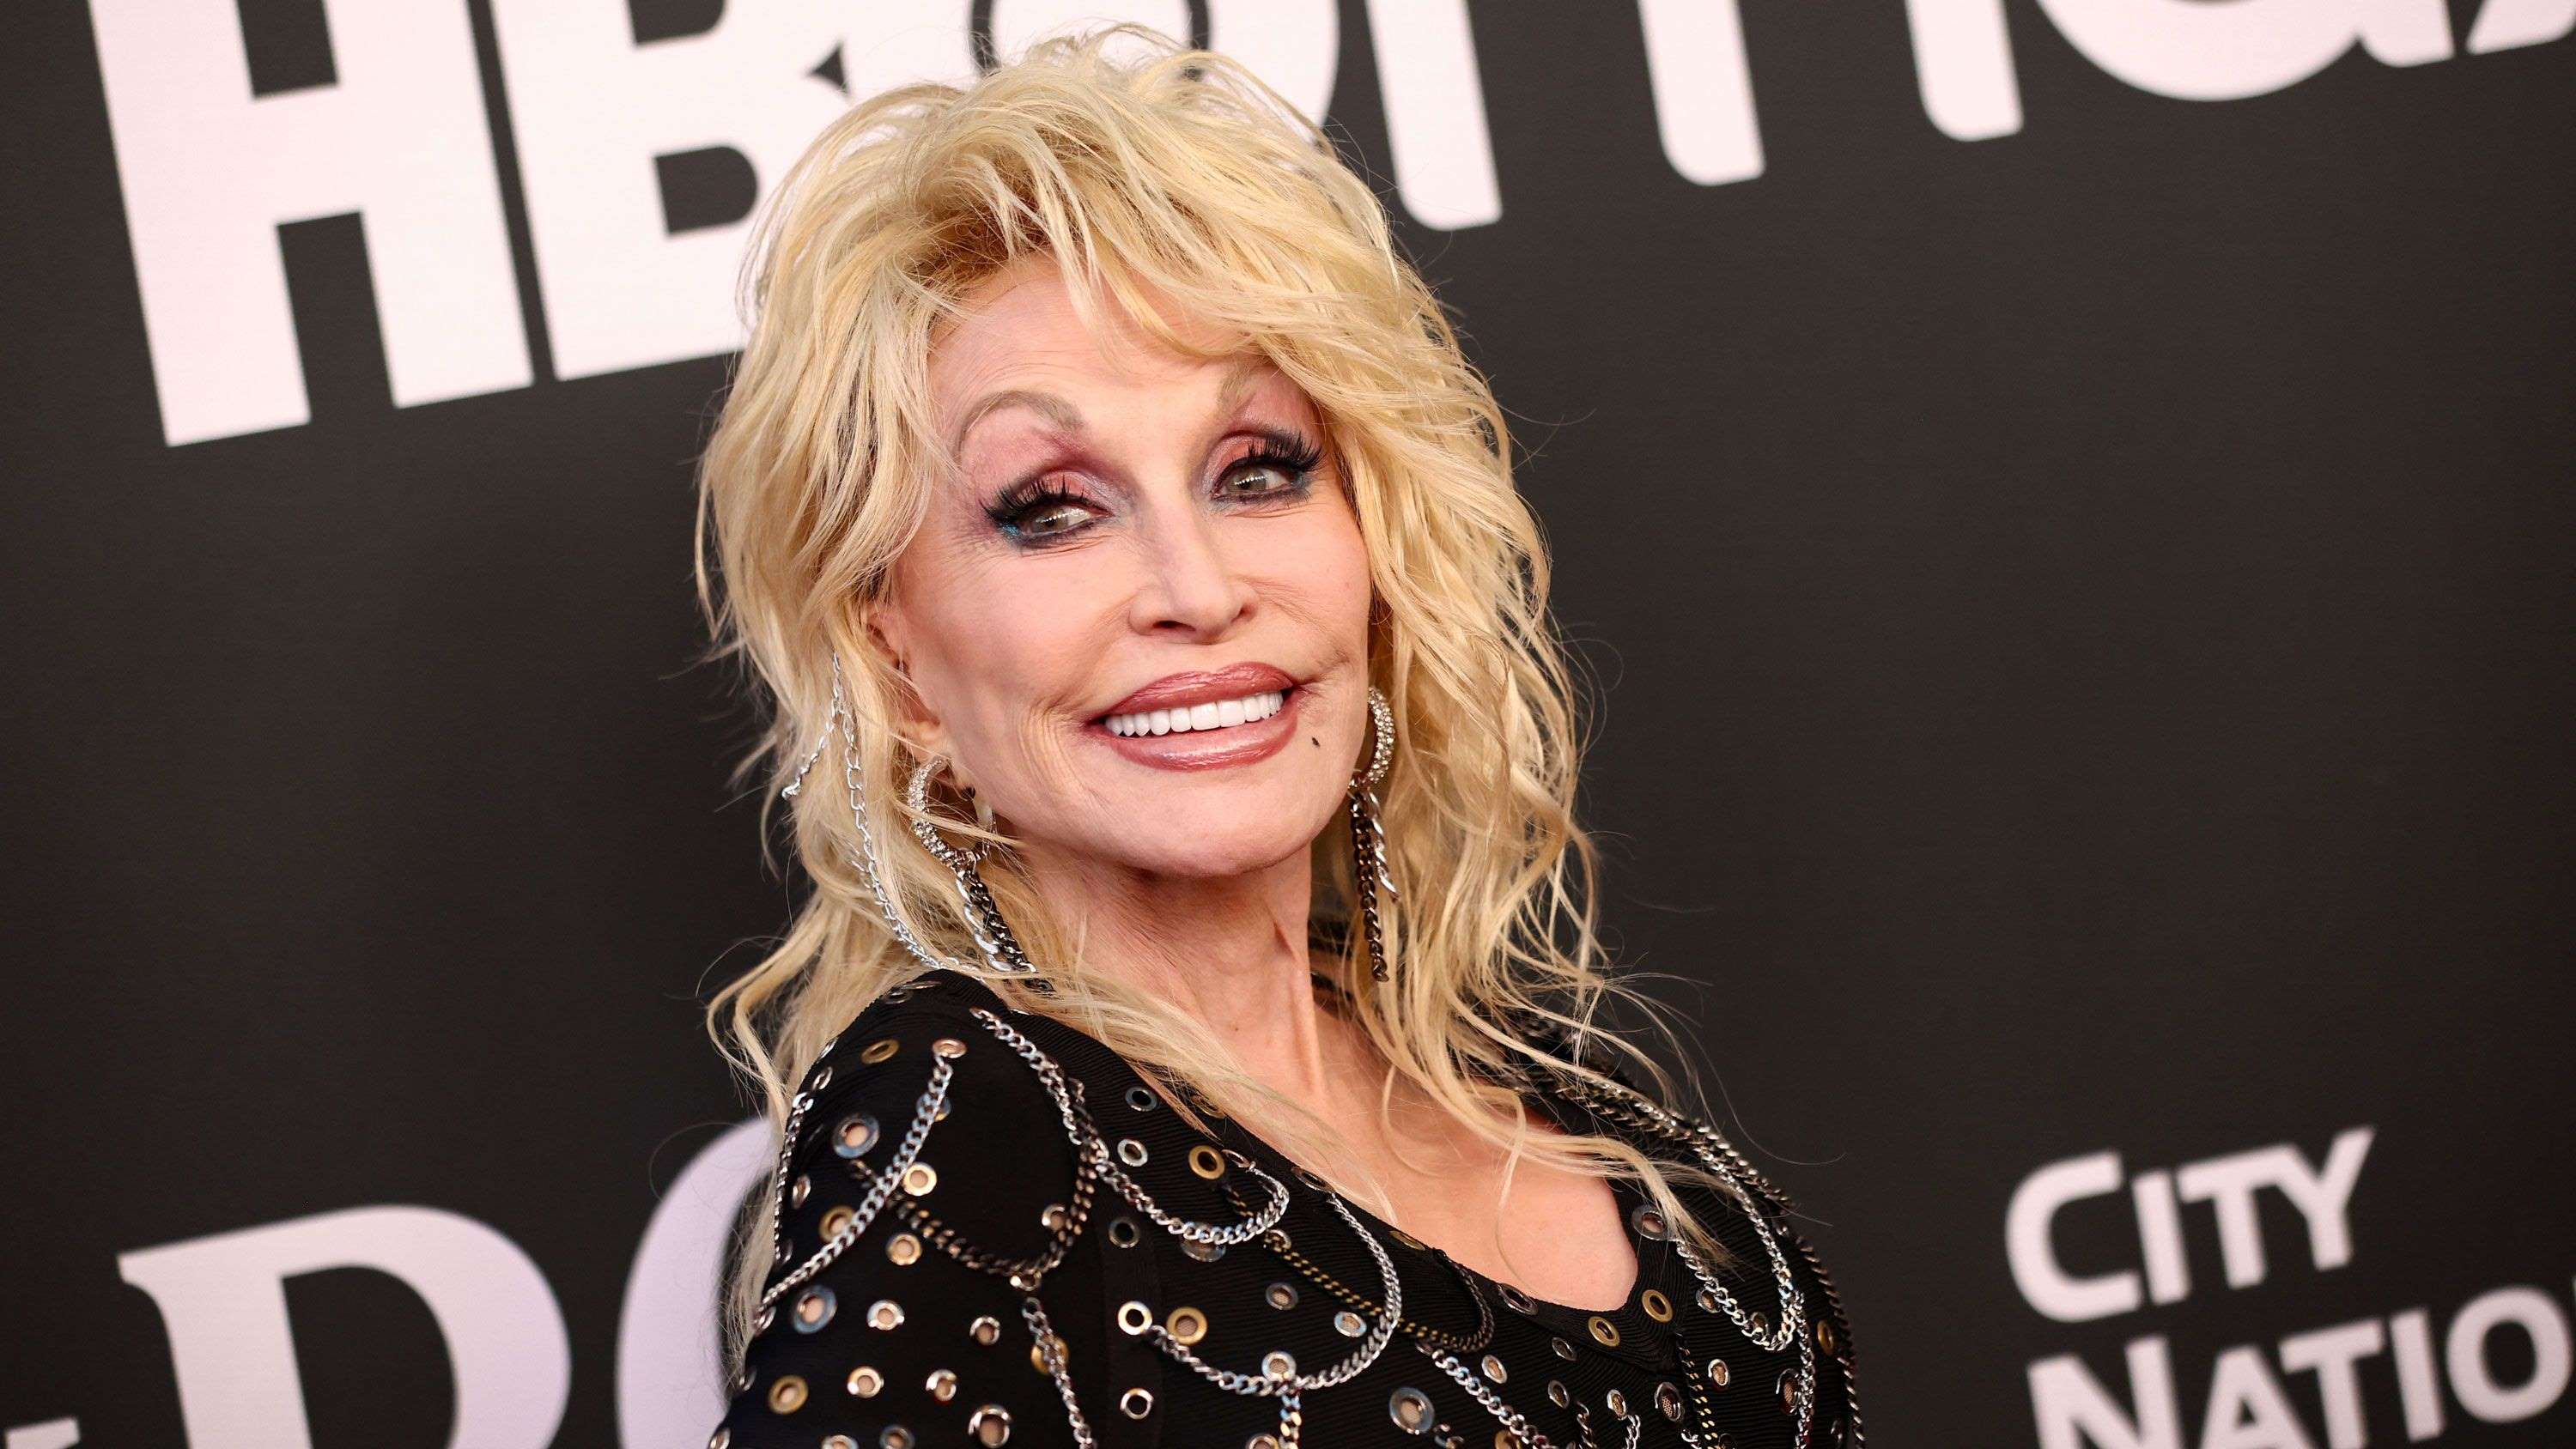 16 Facts About Dolly Parton